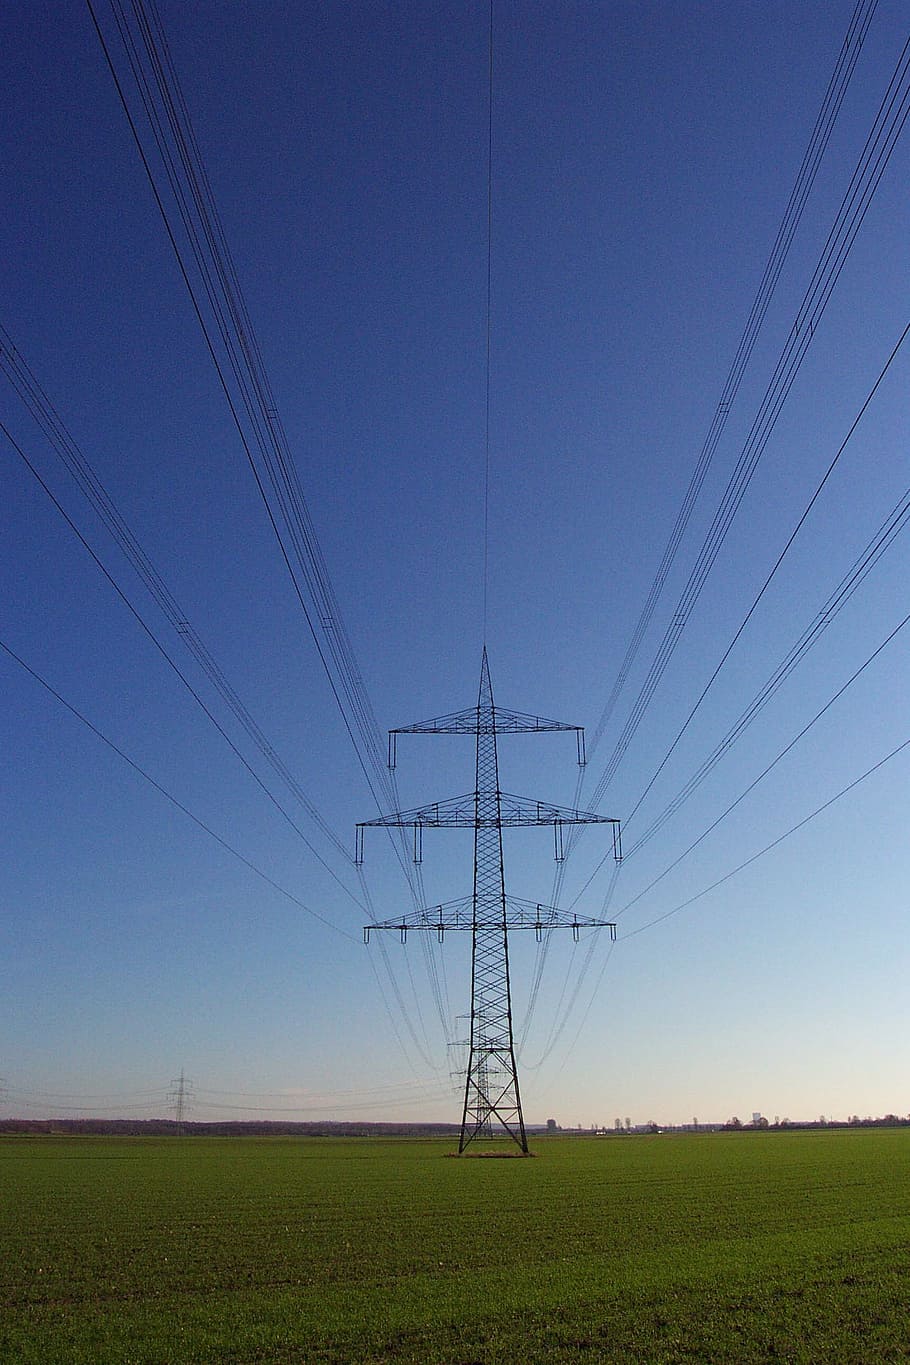 strommast, power lines, electricity, cable, power line, power supply, electricity pylon, sky, fuel and power generation, land